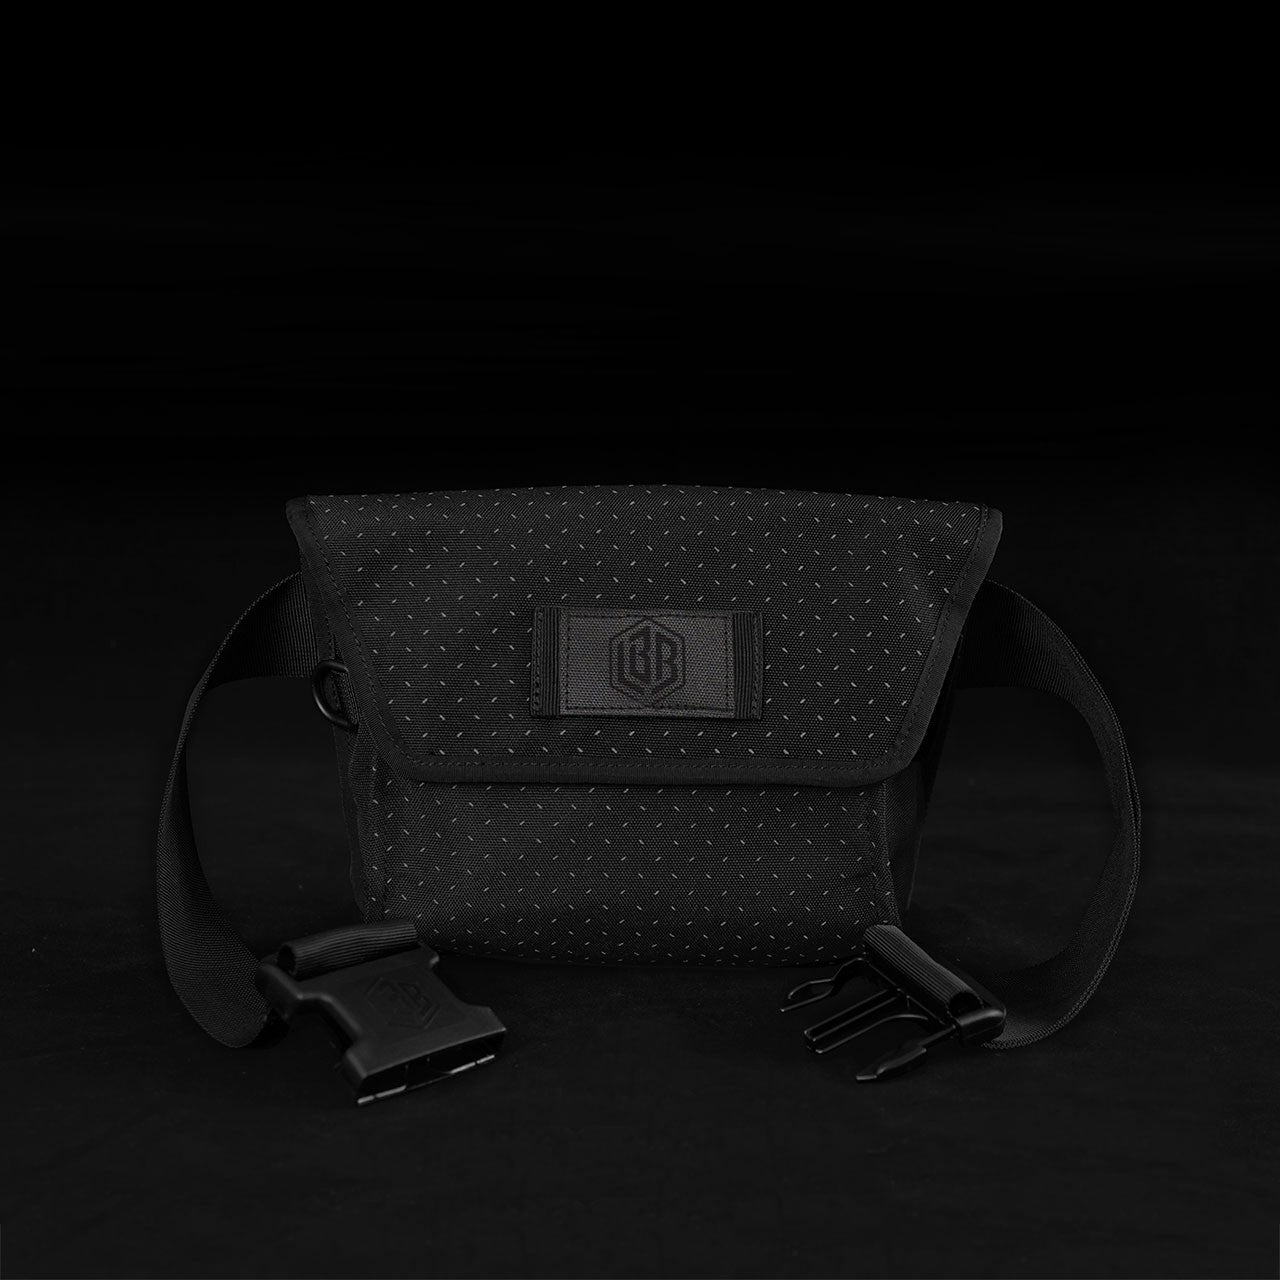 The Musette 'Eclipse' [B-STOCK]